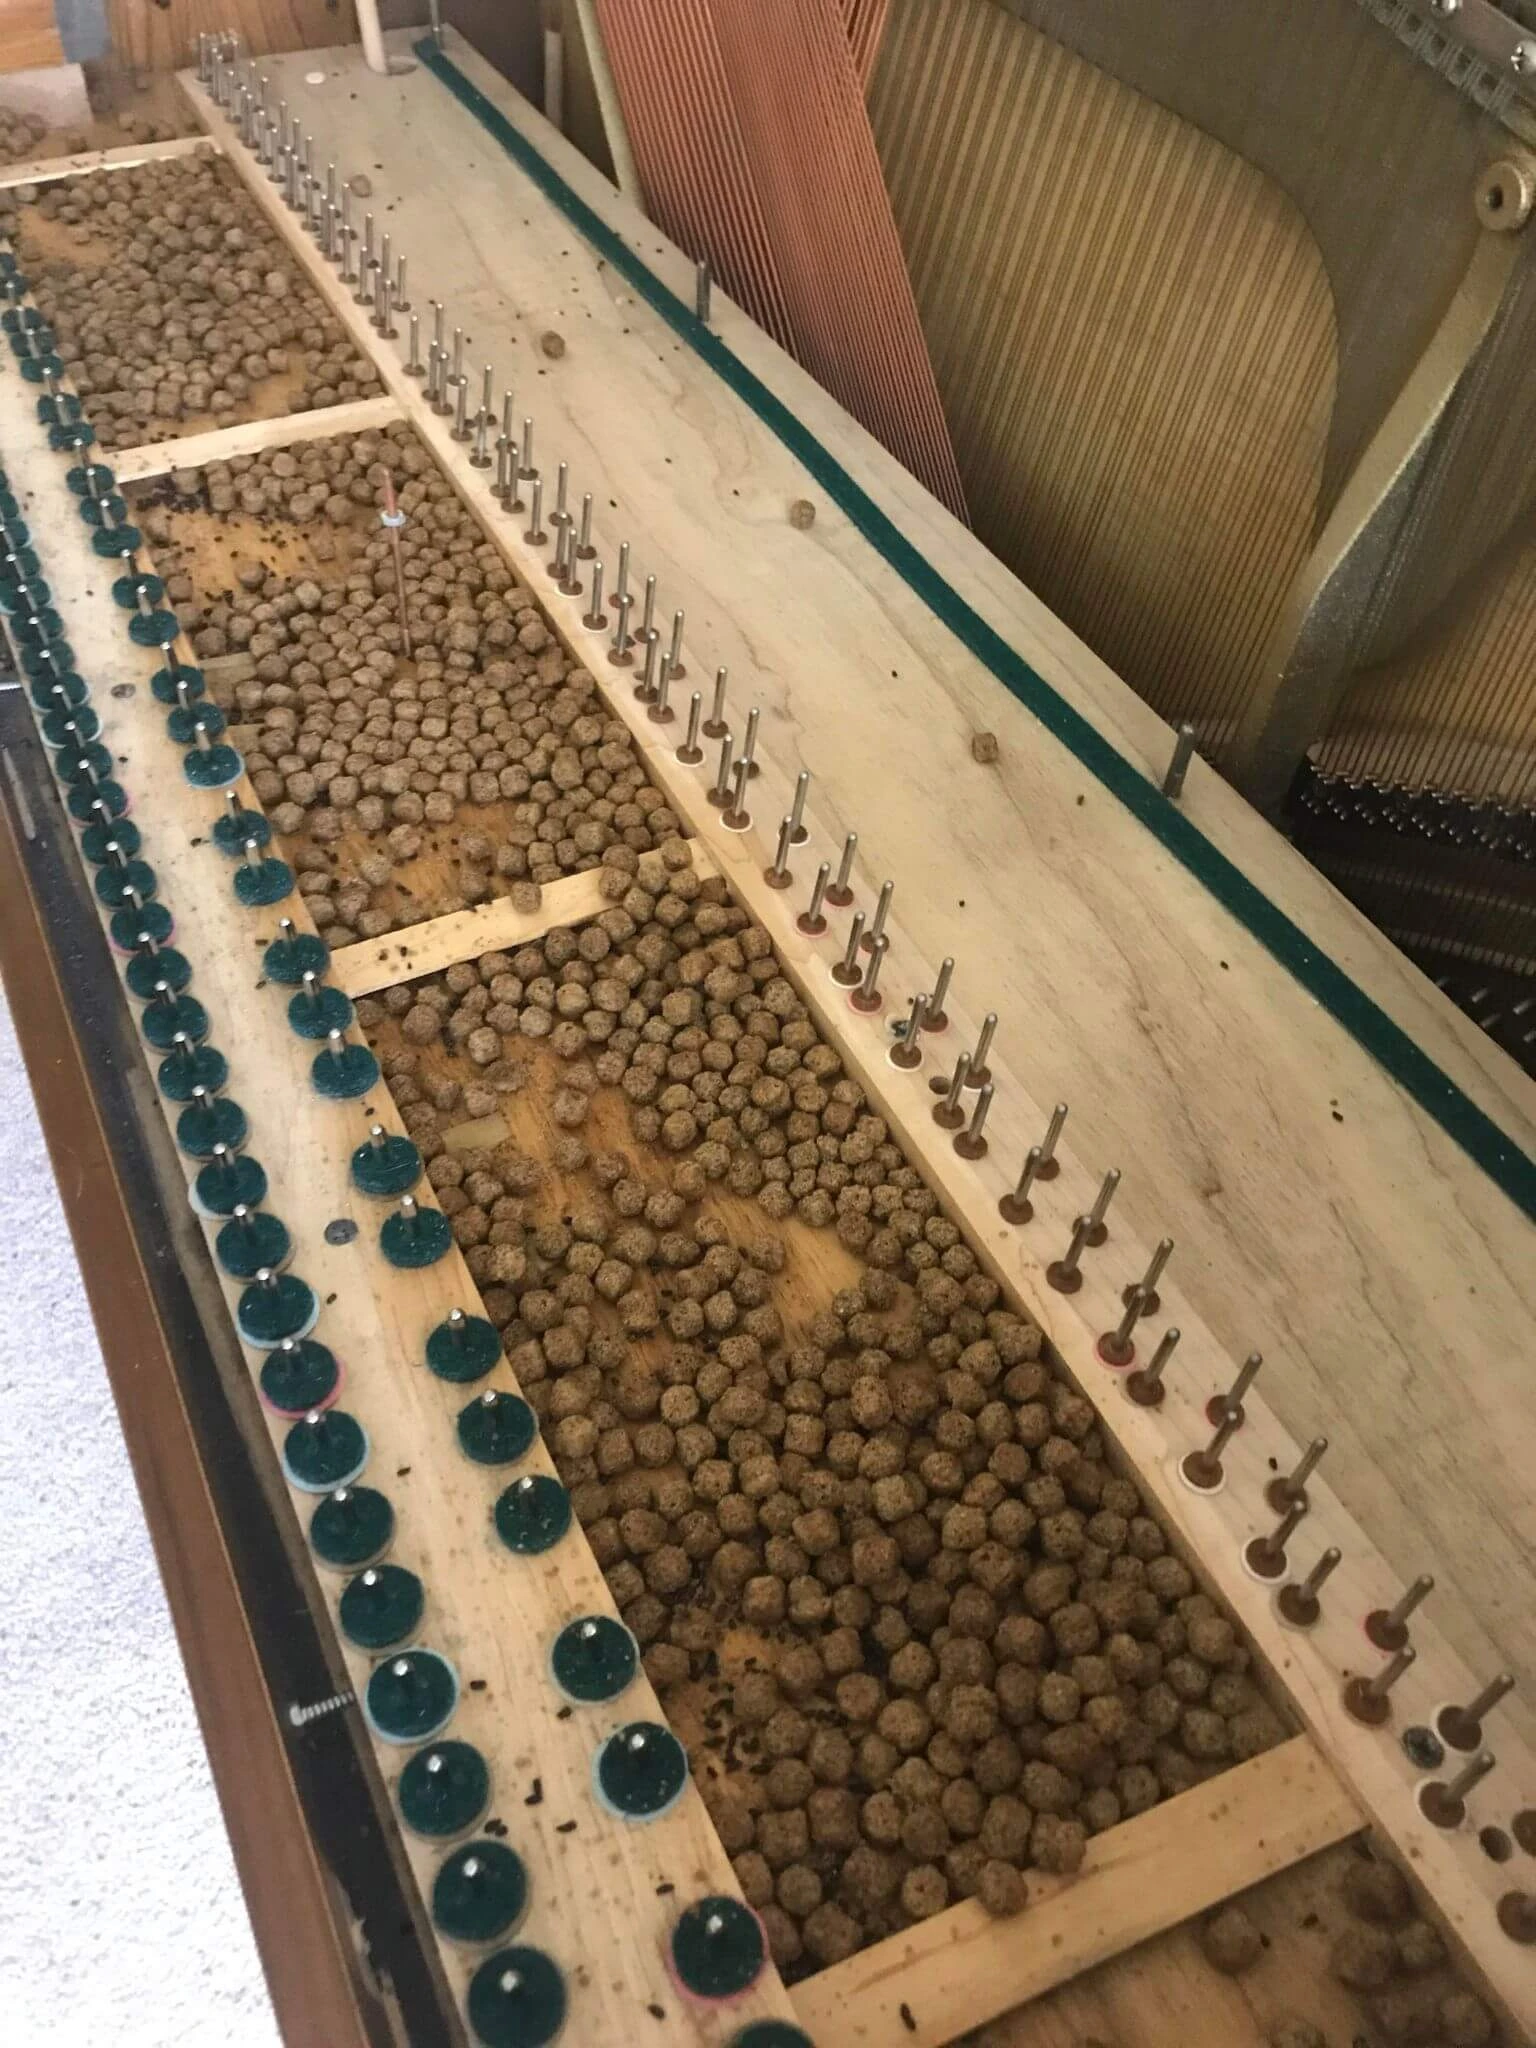 Cleaning out a neglected Baldwin console piano